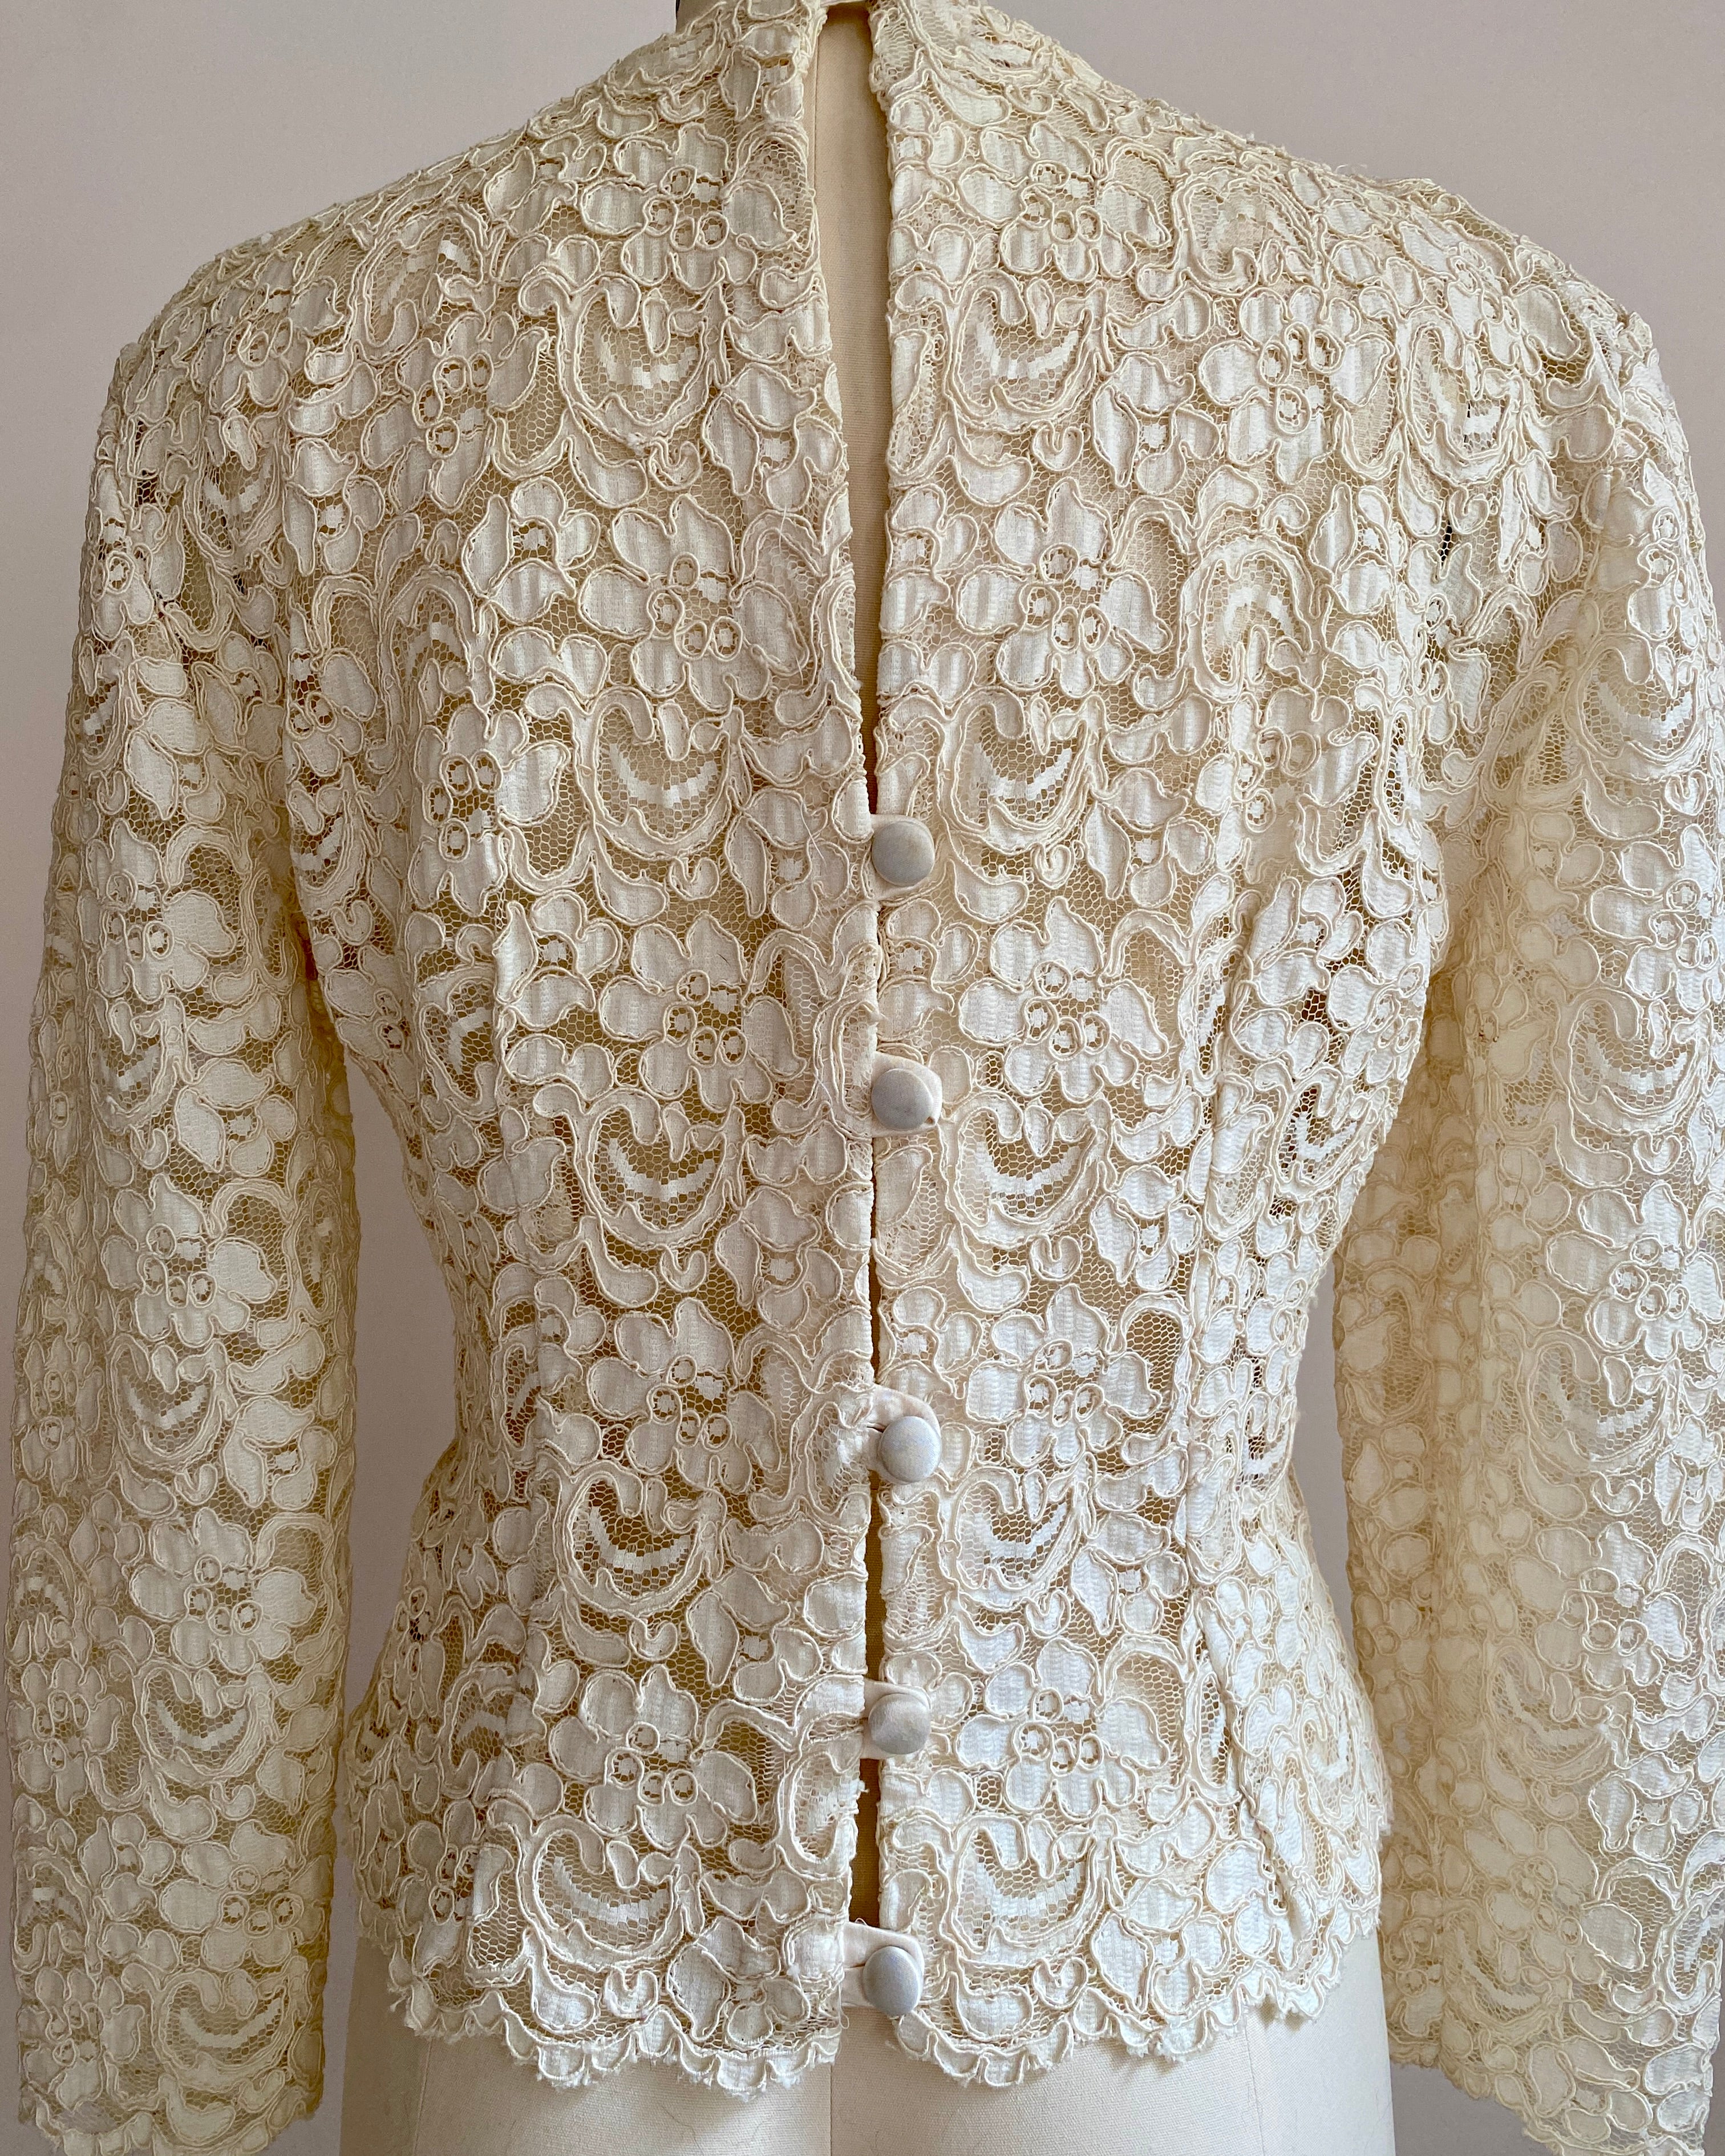 Vintage 1950s Couture Cream Floral Soutache Lace Top Blouse with Bow and Peplum M